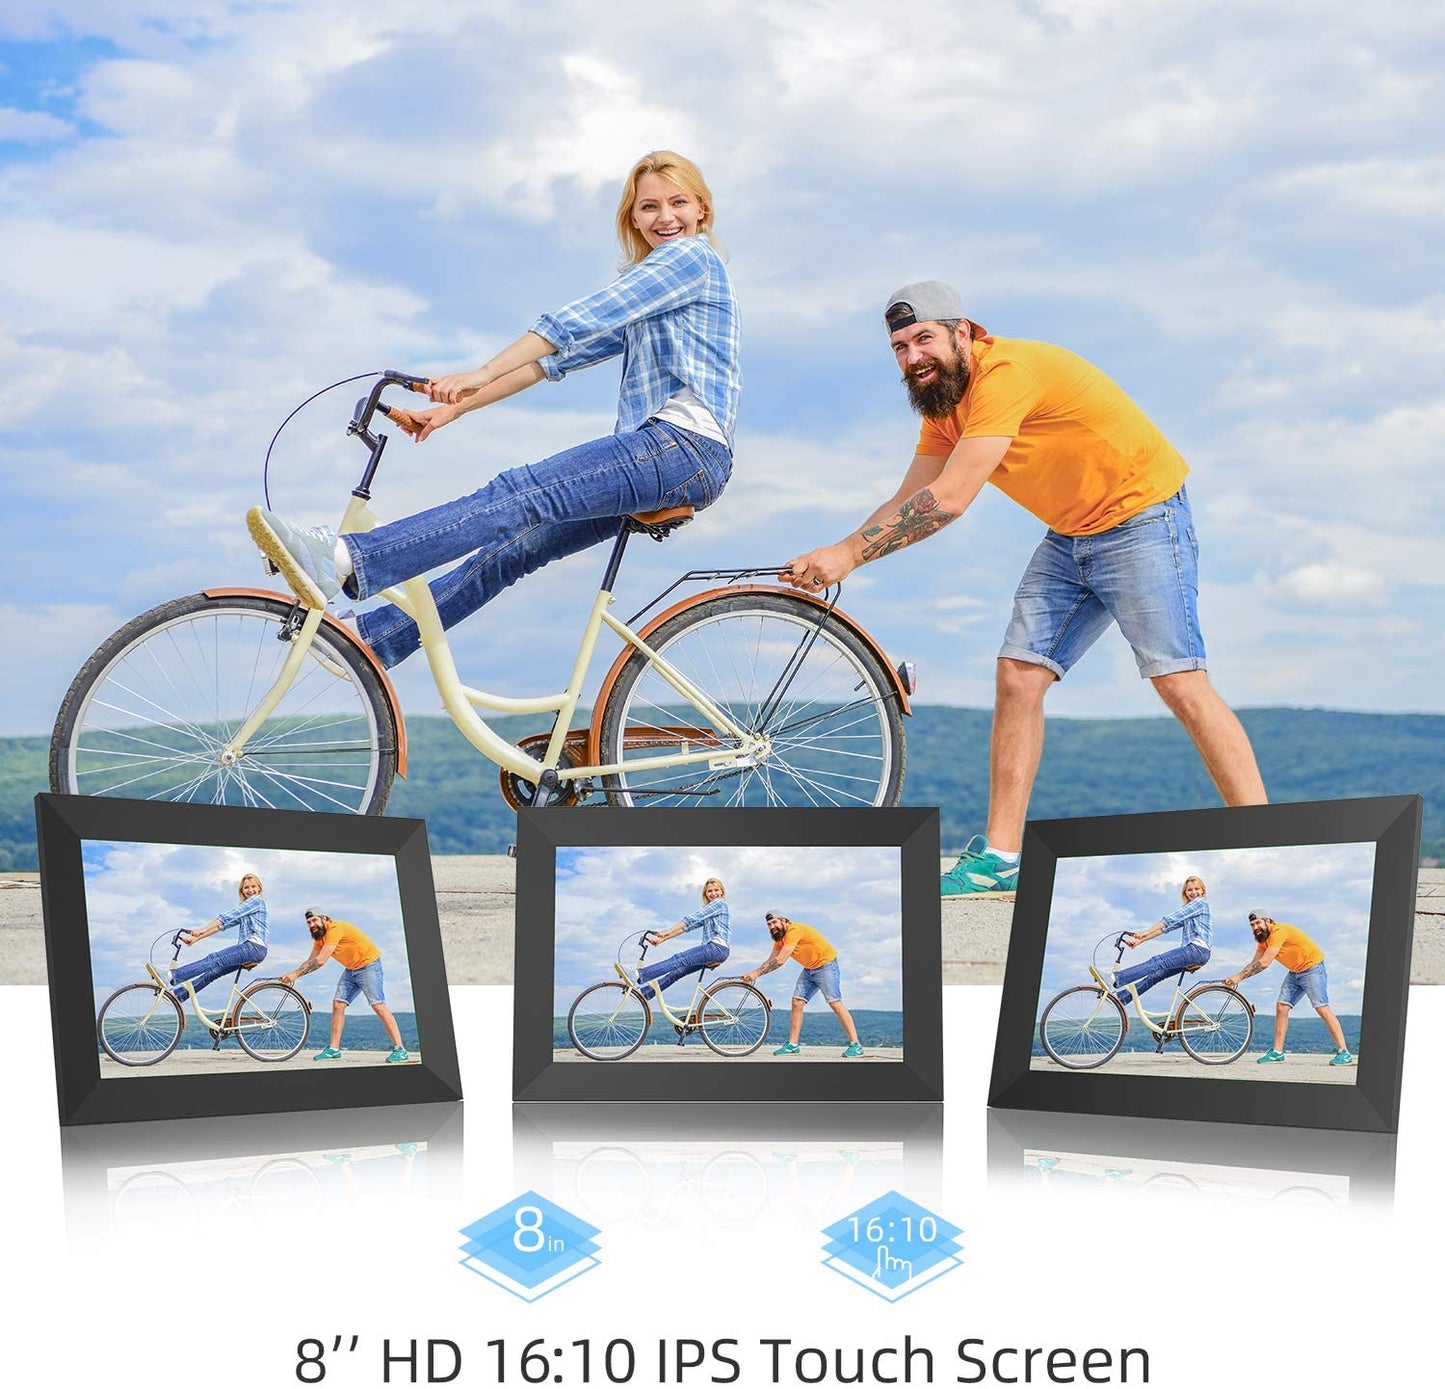 JEEMAK Smart Digital Photo Frame 8" WiFi HD Touch Screen Built-in 16GB Storage Auto-Rotate Easy Share Photos/Videos